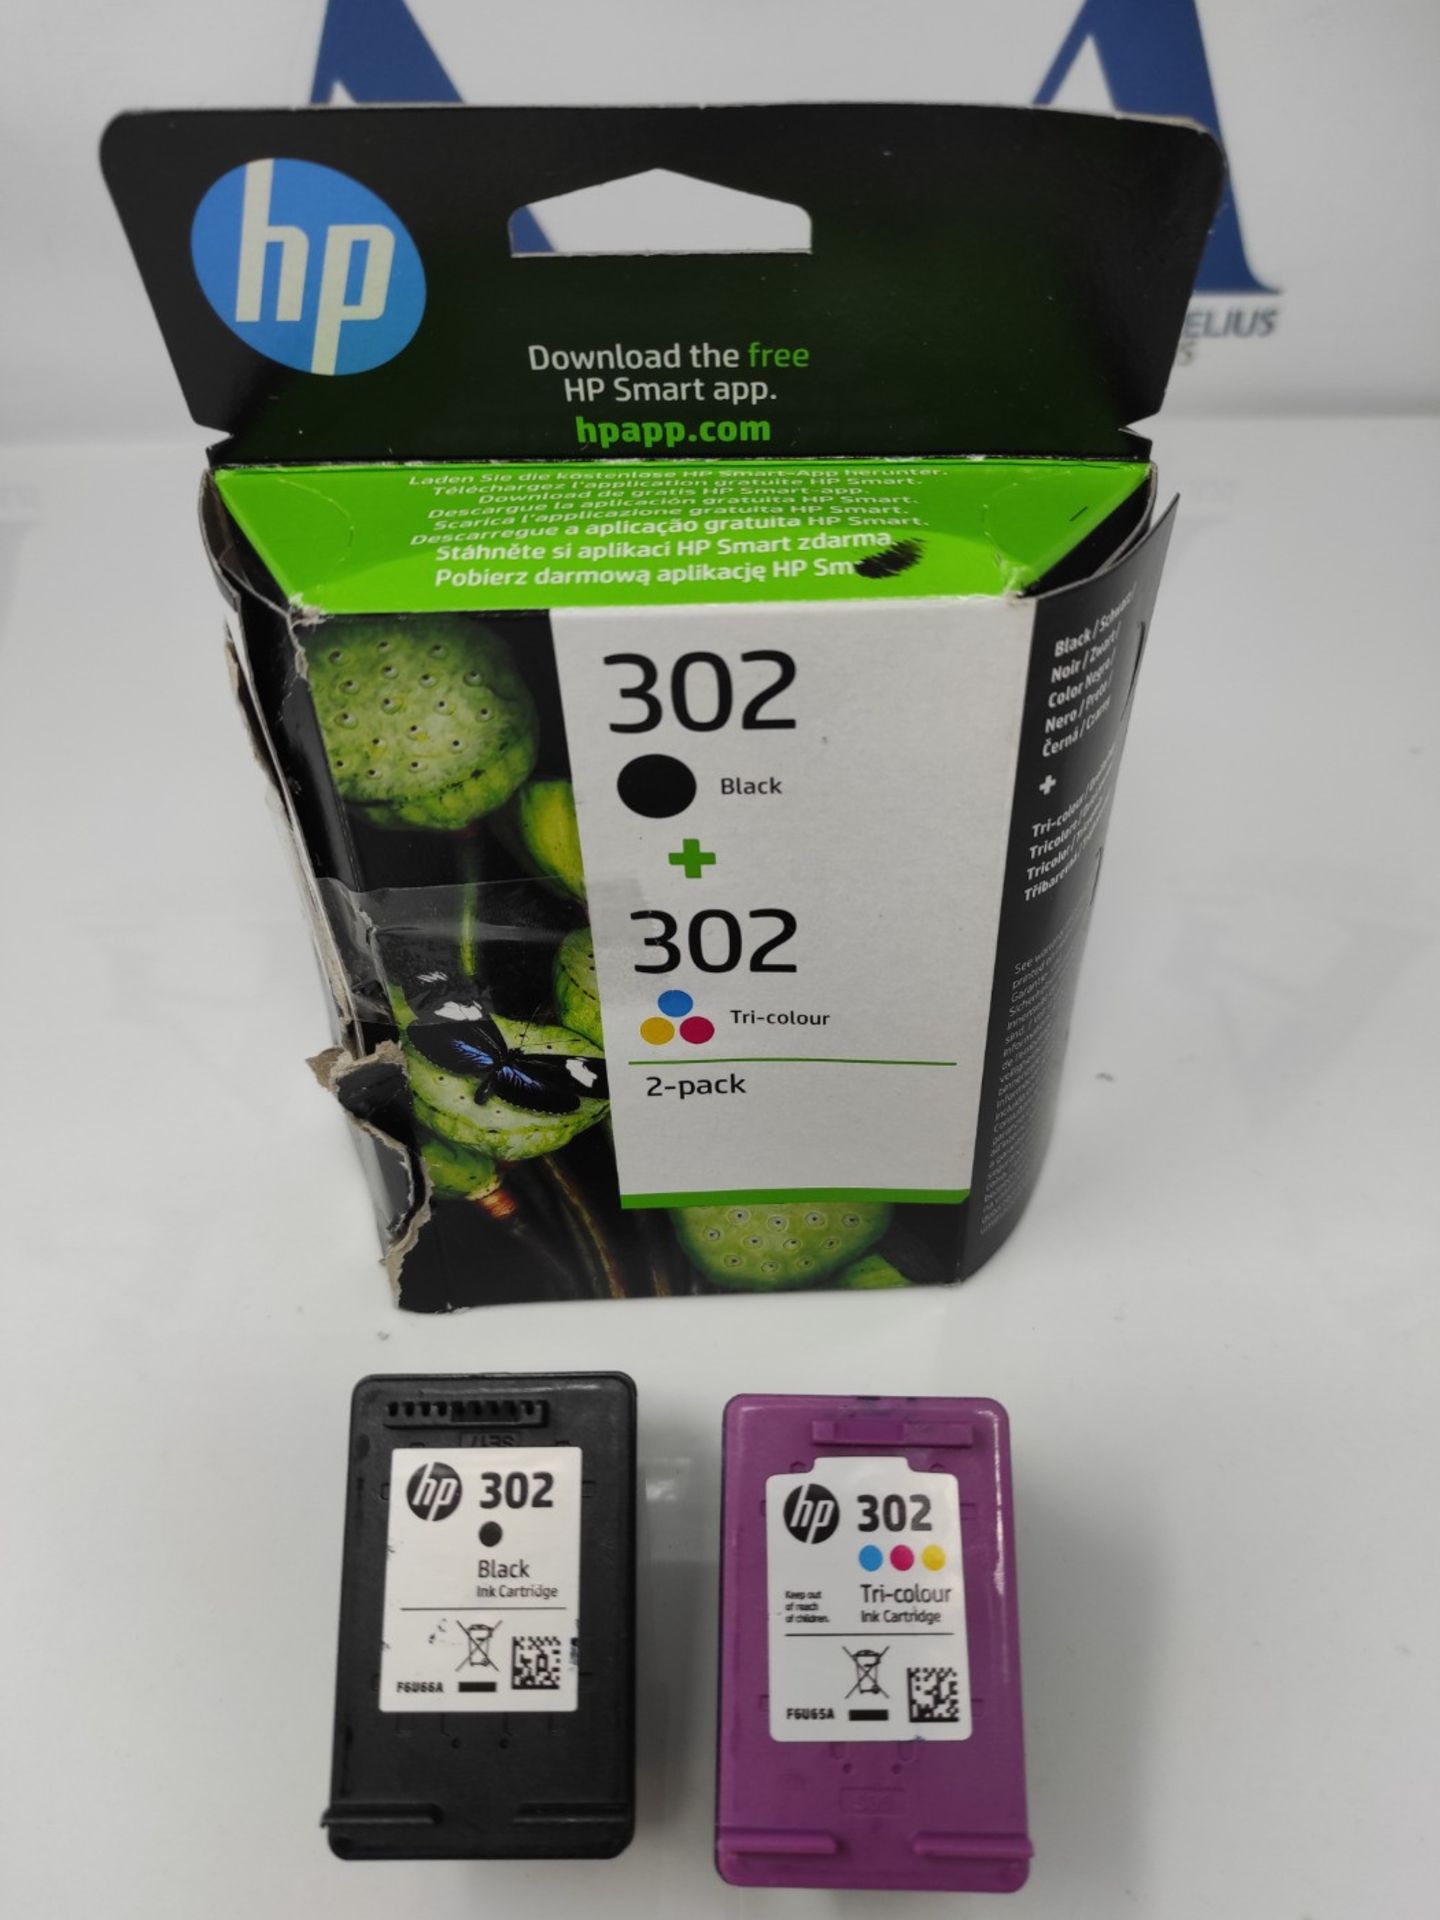 HP X4D37AE 302 Original Ink Cartridges, Black and Tri-color, 2 Count (Pack of 1) - Image 2 of 2